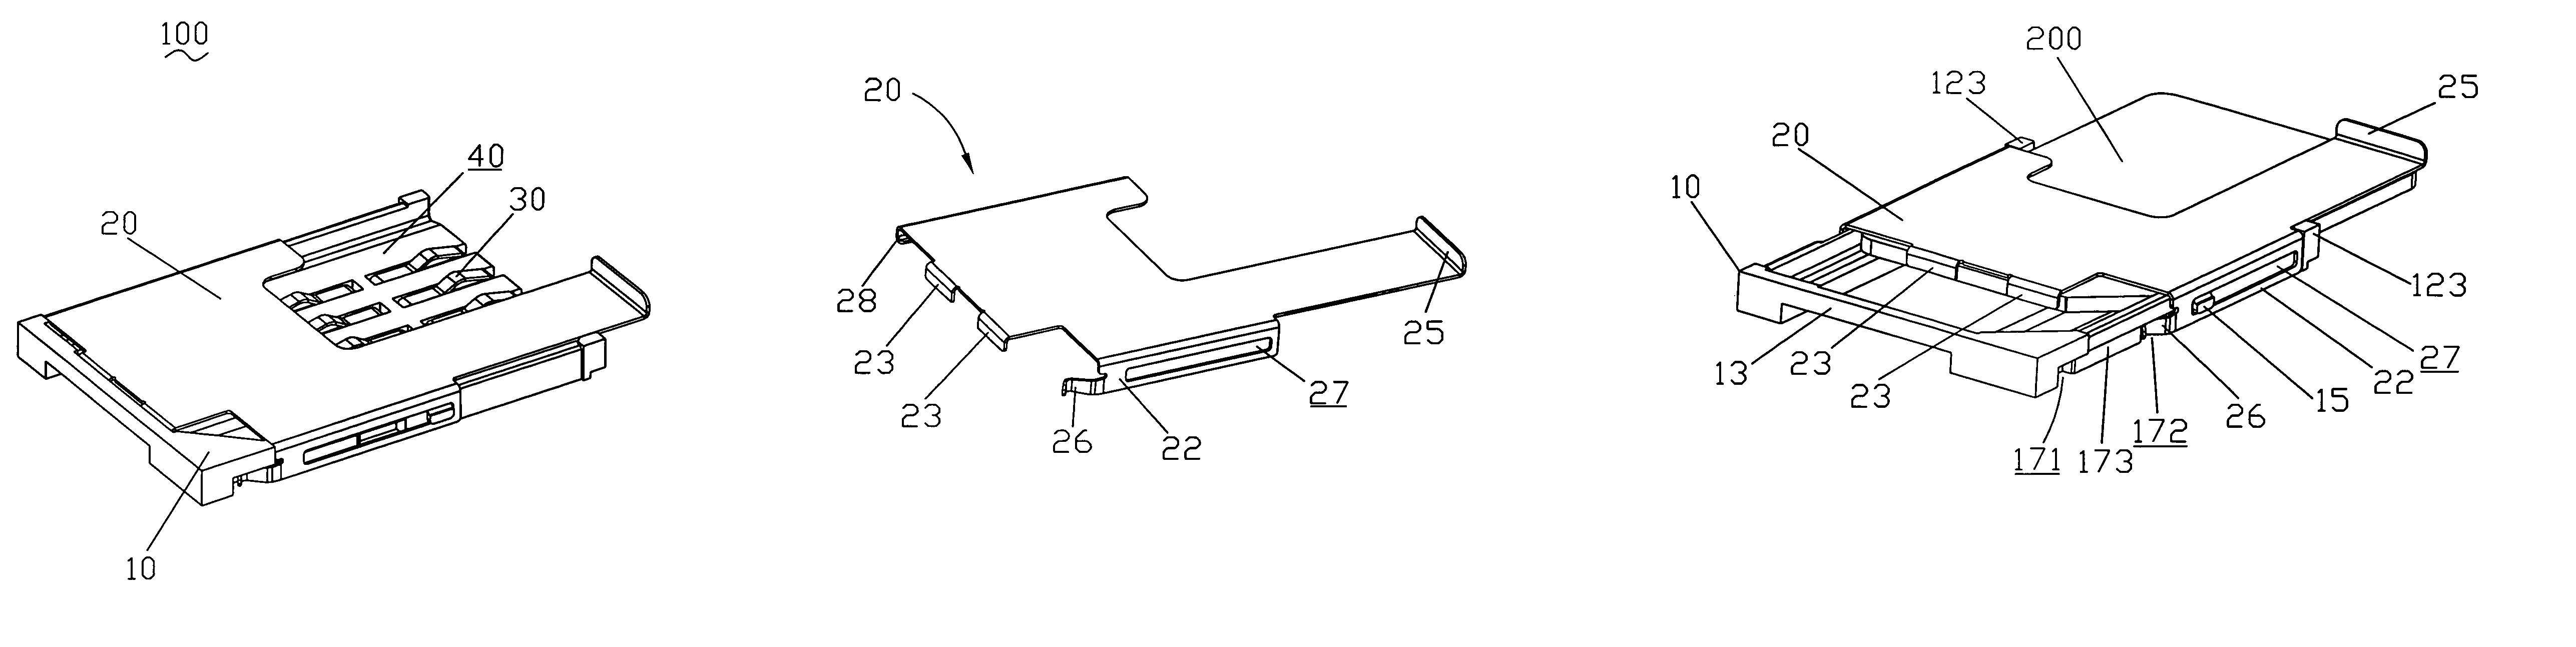 SIM card connector with card ejection mechanism